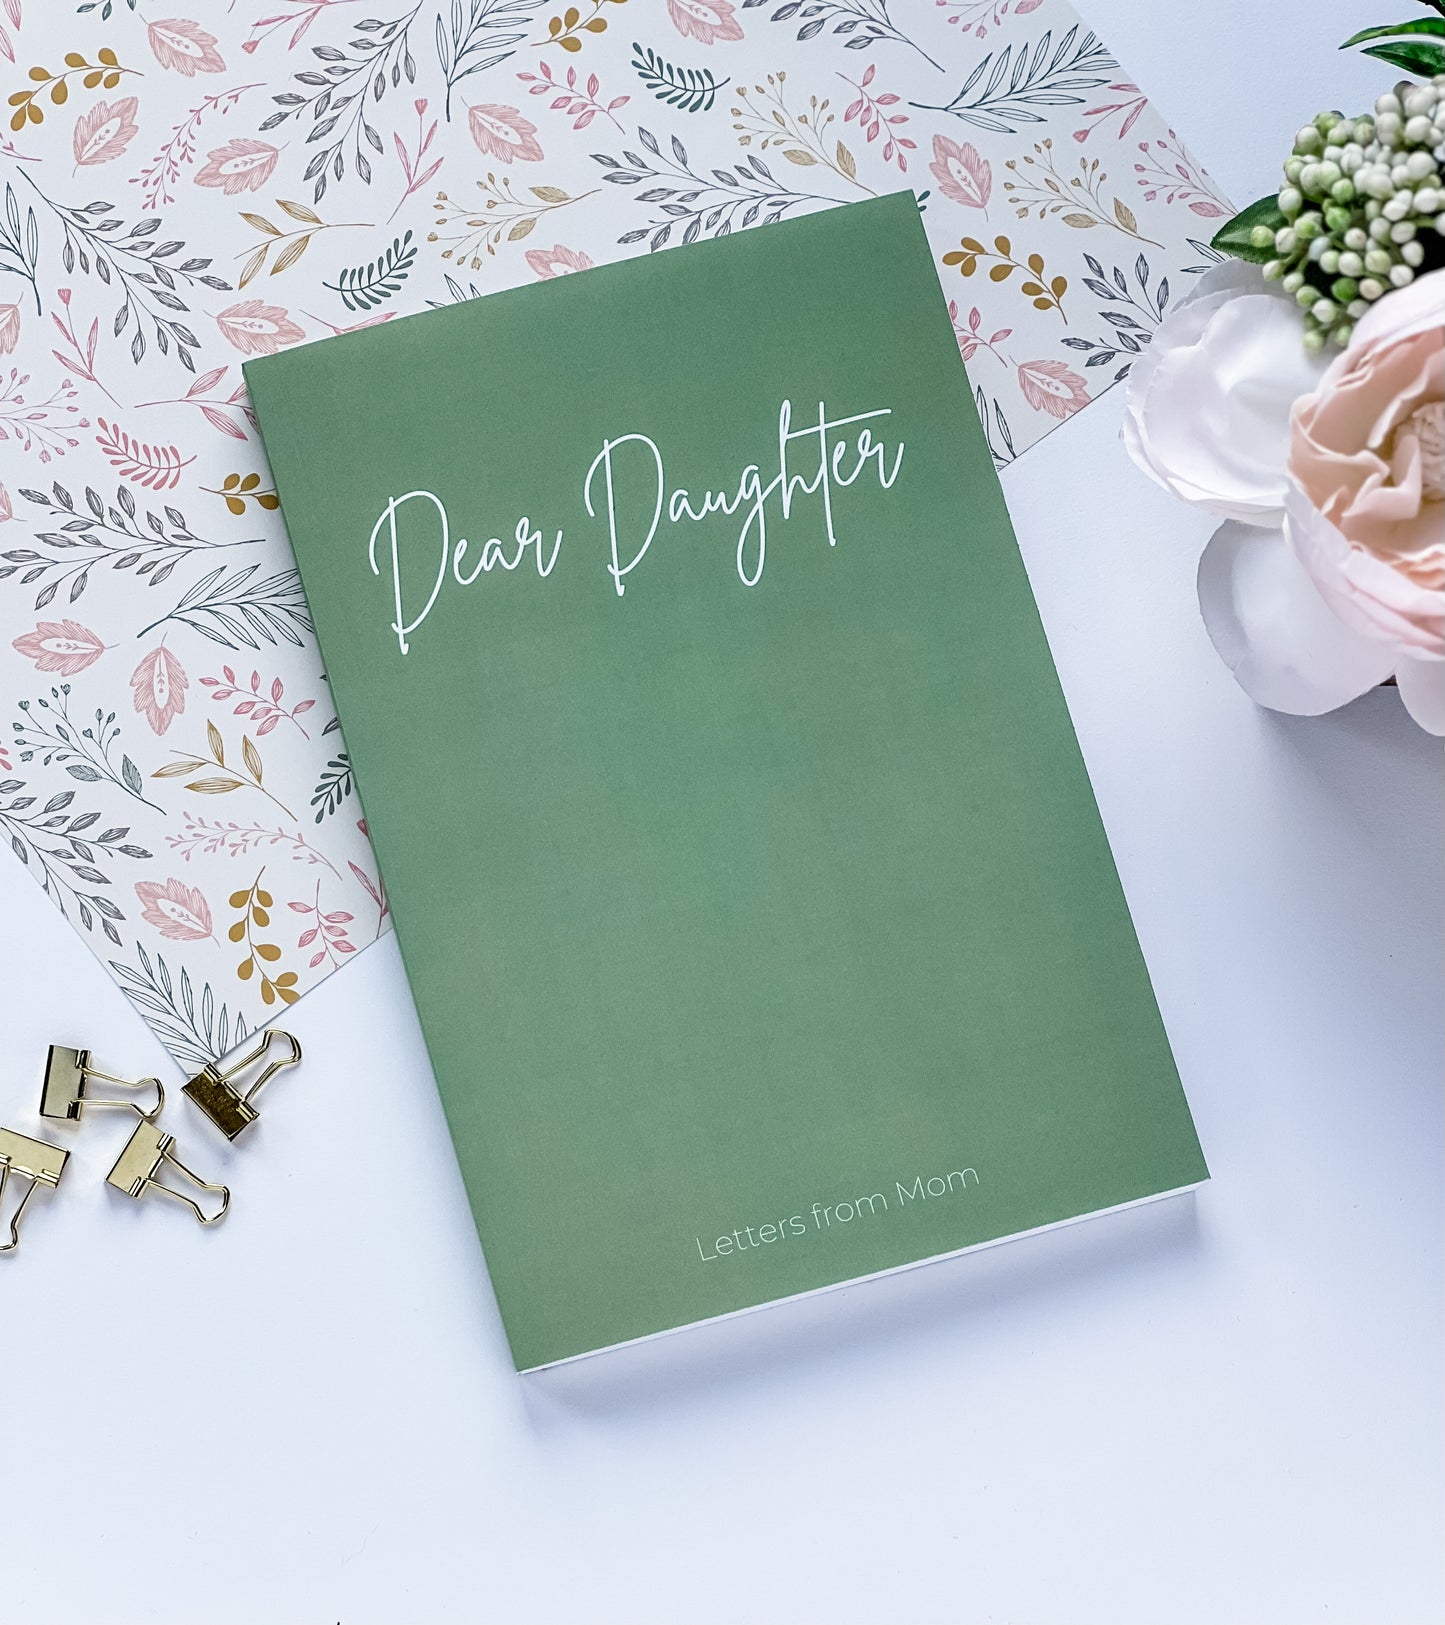 Dear Daughter Journal - Letters From Mom